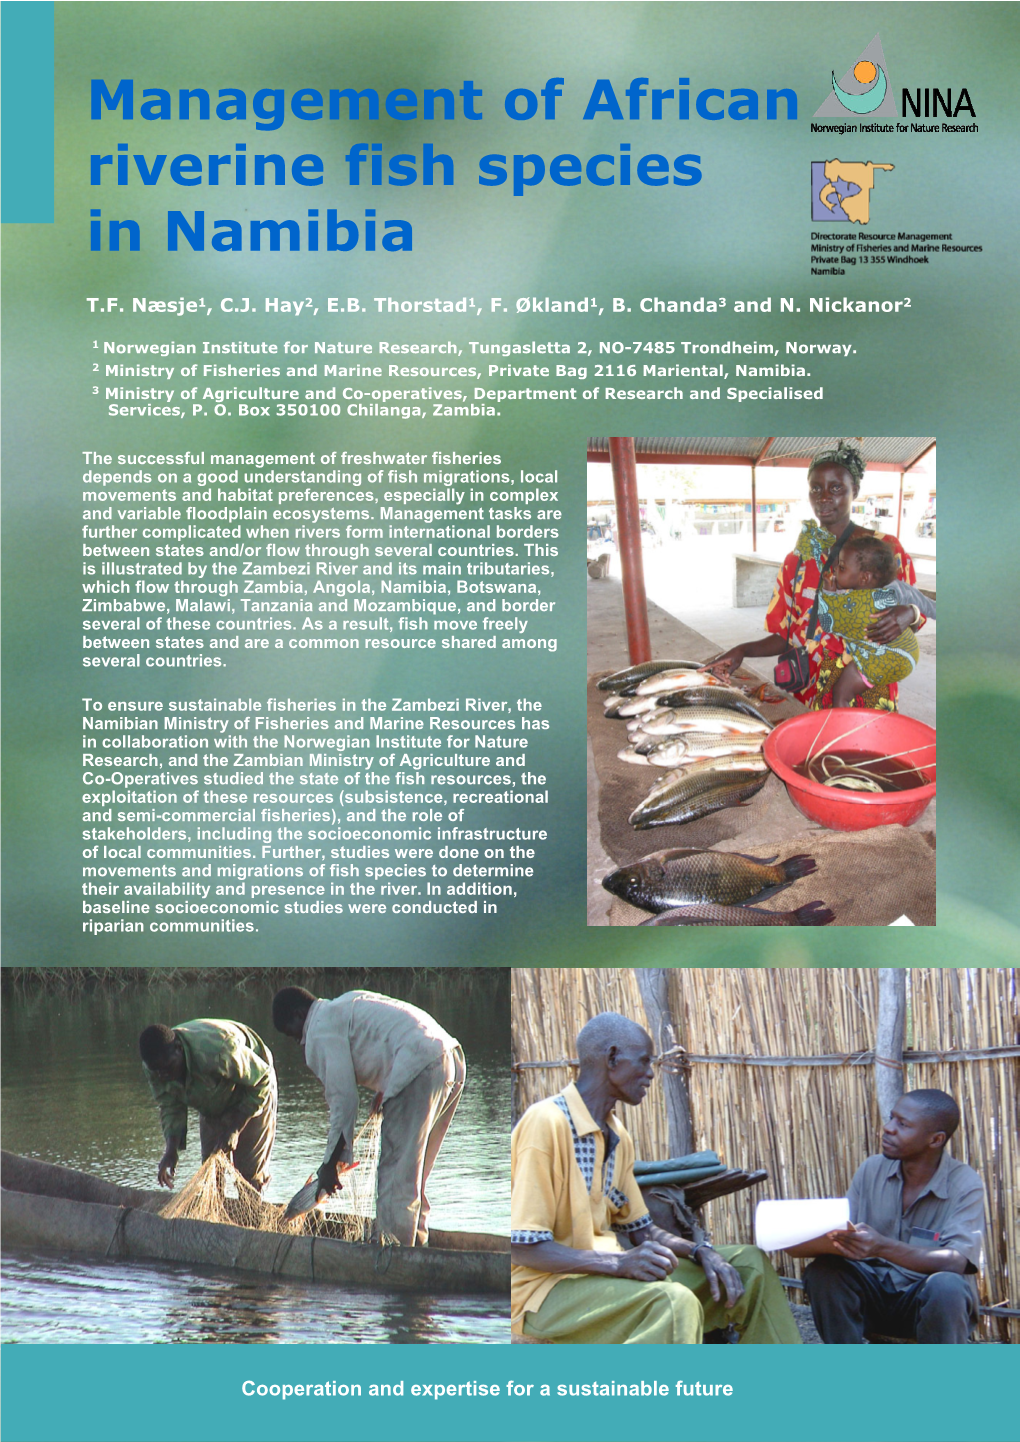 Management of African Riverine Fish Species in Namibia